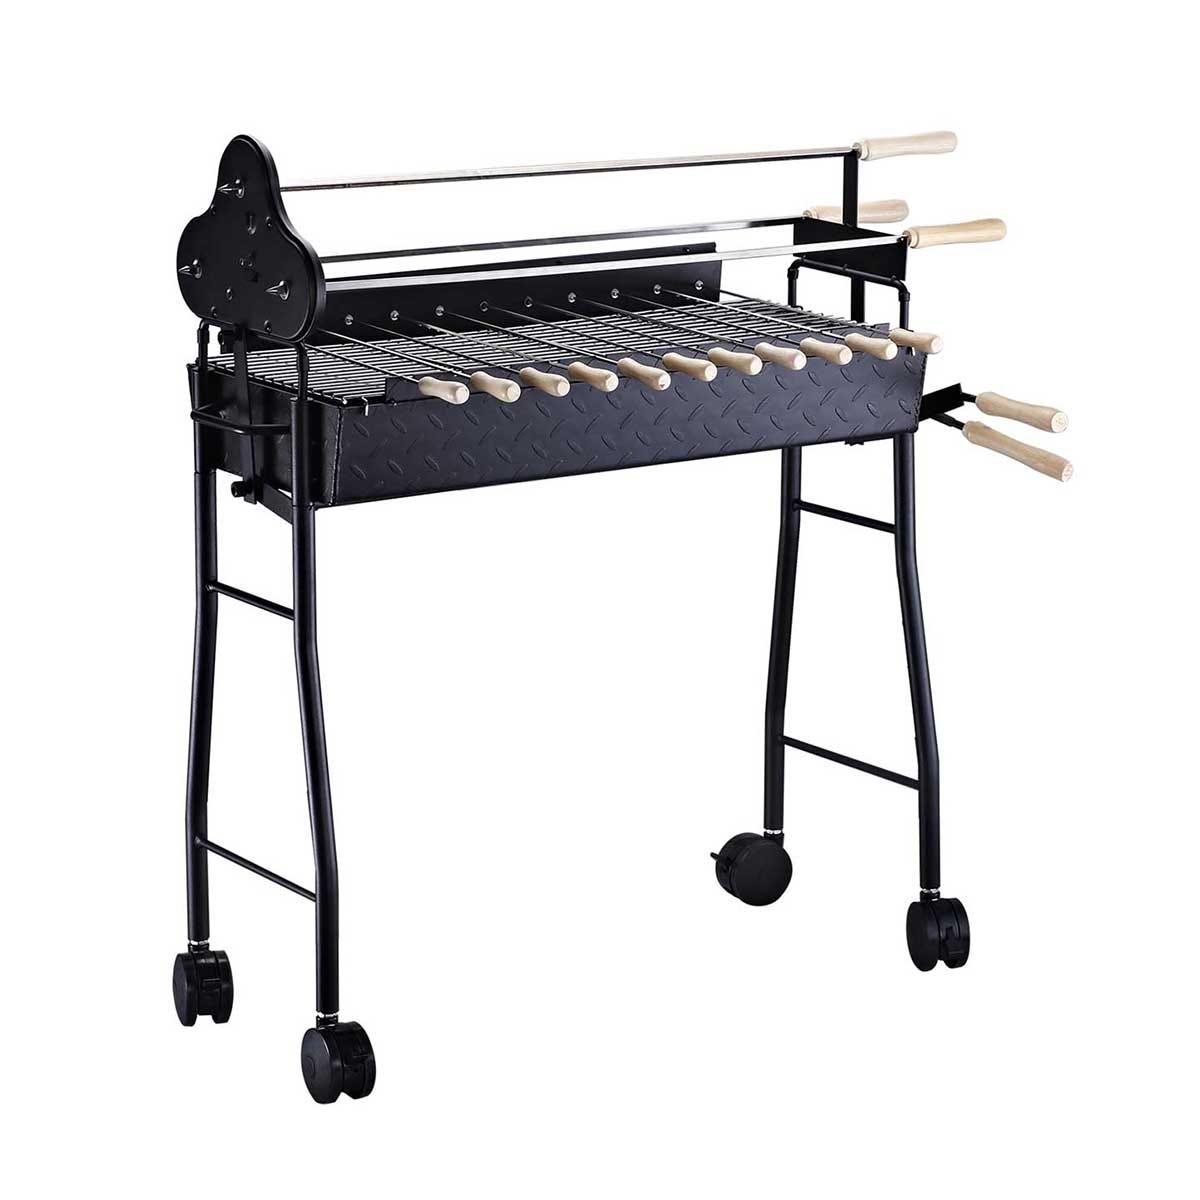 Outsunny Charcoal BBQ Grill